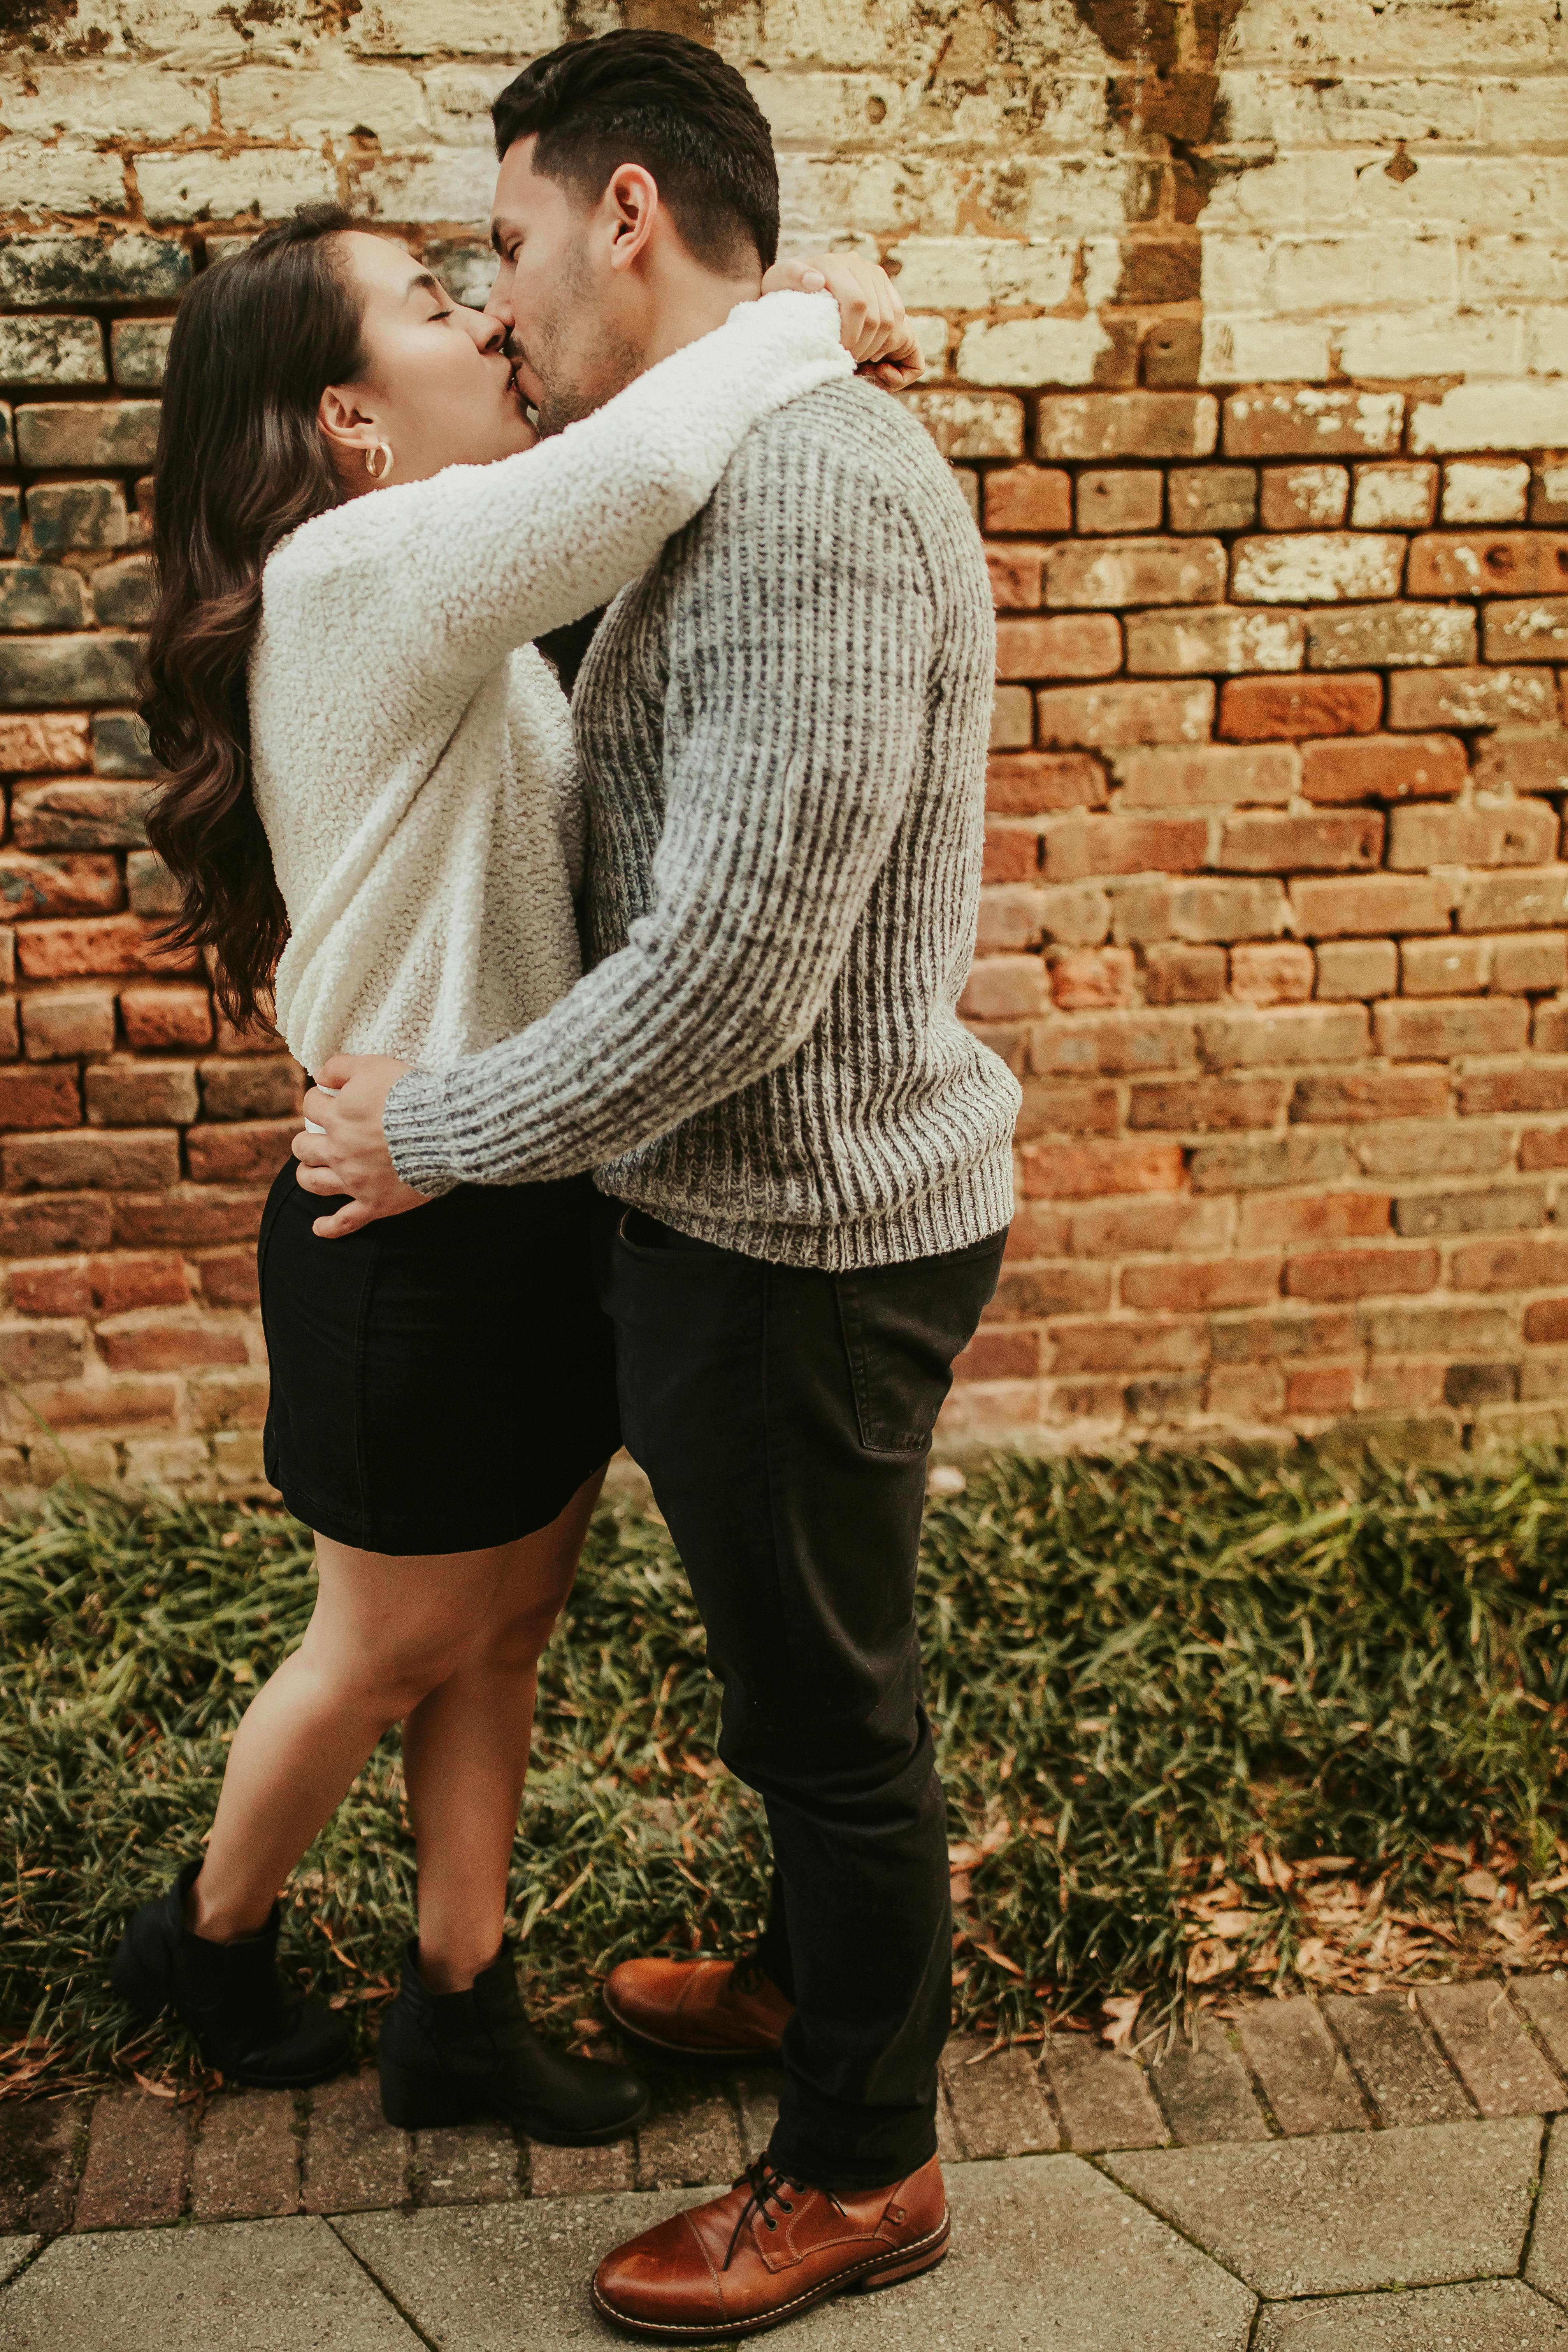 Couple standing on street while kissing · Free Stock Photo